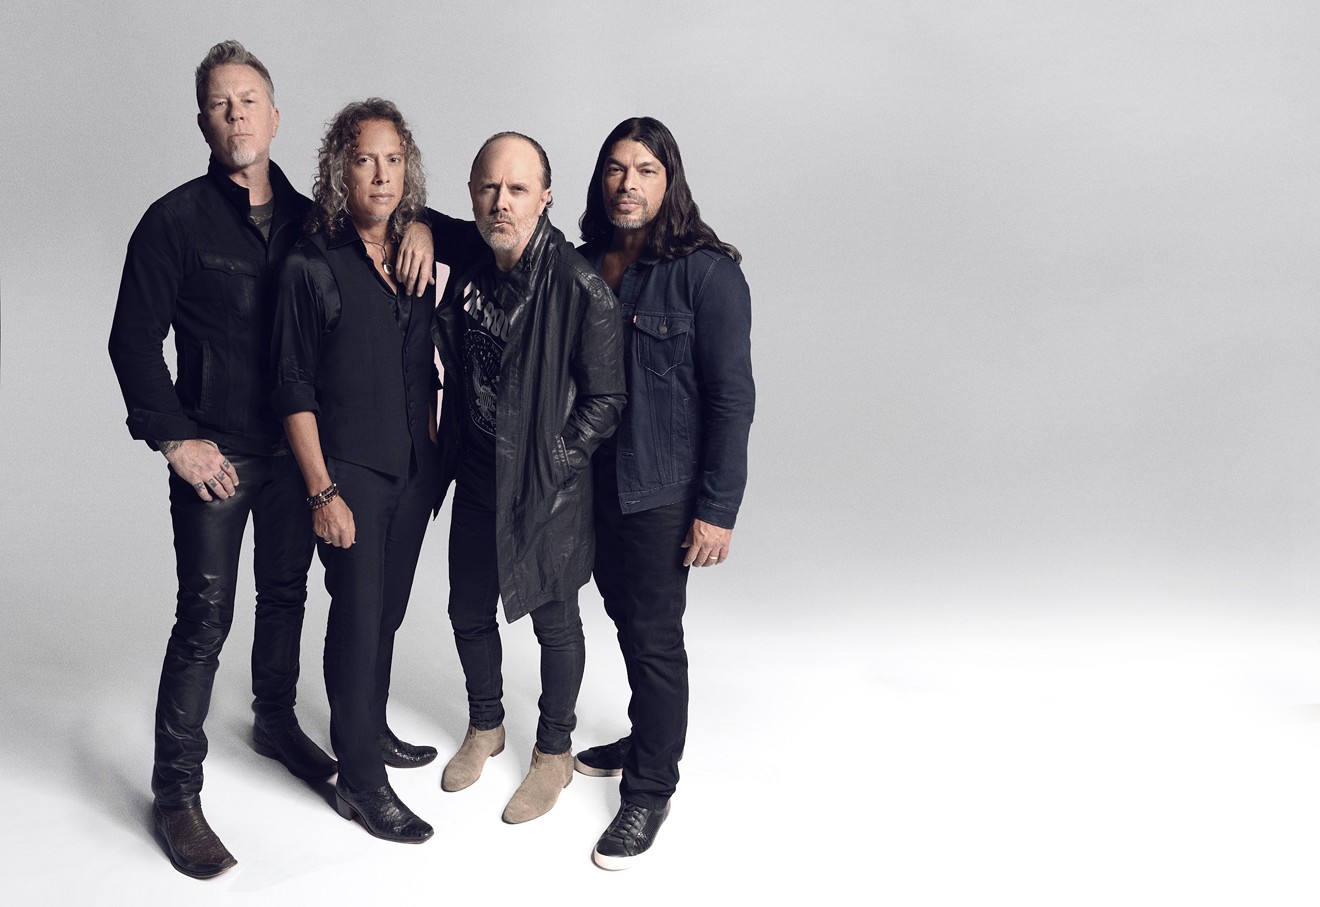 Metallica is scheduled to perform on Friday, August 4, at University of Phoenix Stadium in Glendale.